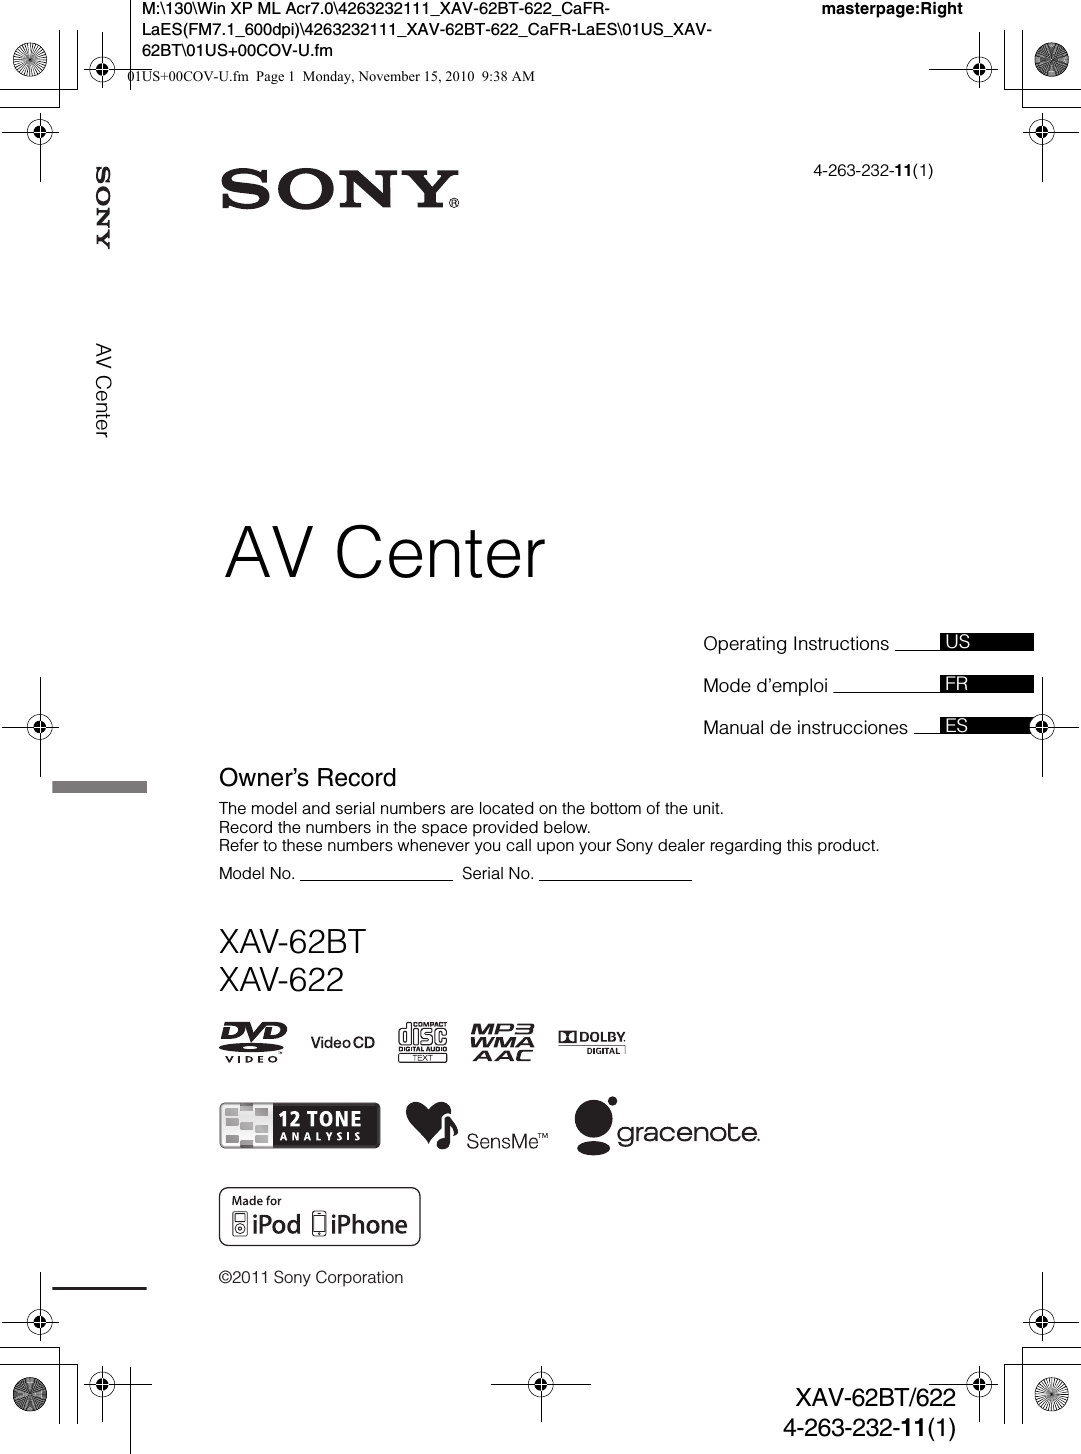 ©2011 Sony CorporationOperating Instructions Mode d’emploi Manual de instrucciones 4-263-232-11(1)XAV-62BTXAV-622AV CenterXAV-62BT/6224-263-232-11(1)masterpage:RightM:\130\Win XP ML Acr7.0\4263232111_XAV-62BT-622_CaFR-LaES(FM7.1_600dpi)\4263232111_XAV-62BT-622_CaFR-LaES\01US_XAV-62BT\01US+00COV-U.fmOwner’s RecordThe model and serial numbers are located on the bottom of the unit.Record the numbers in the space provided below.Refer to these numbers whenever you call upon your Sony dealer regarding this product.Model No.                                    Serial No.                                  USFRESAV Center01US+00COV-U.fm  Page 1  Monday, November 15, 2010  9:38 AM